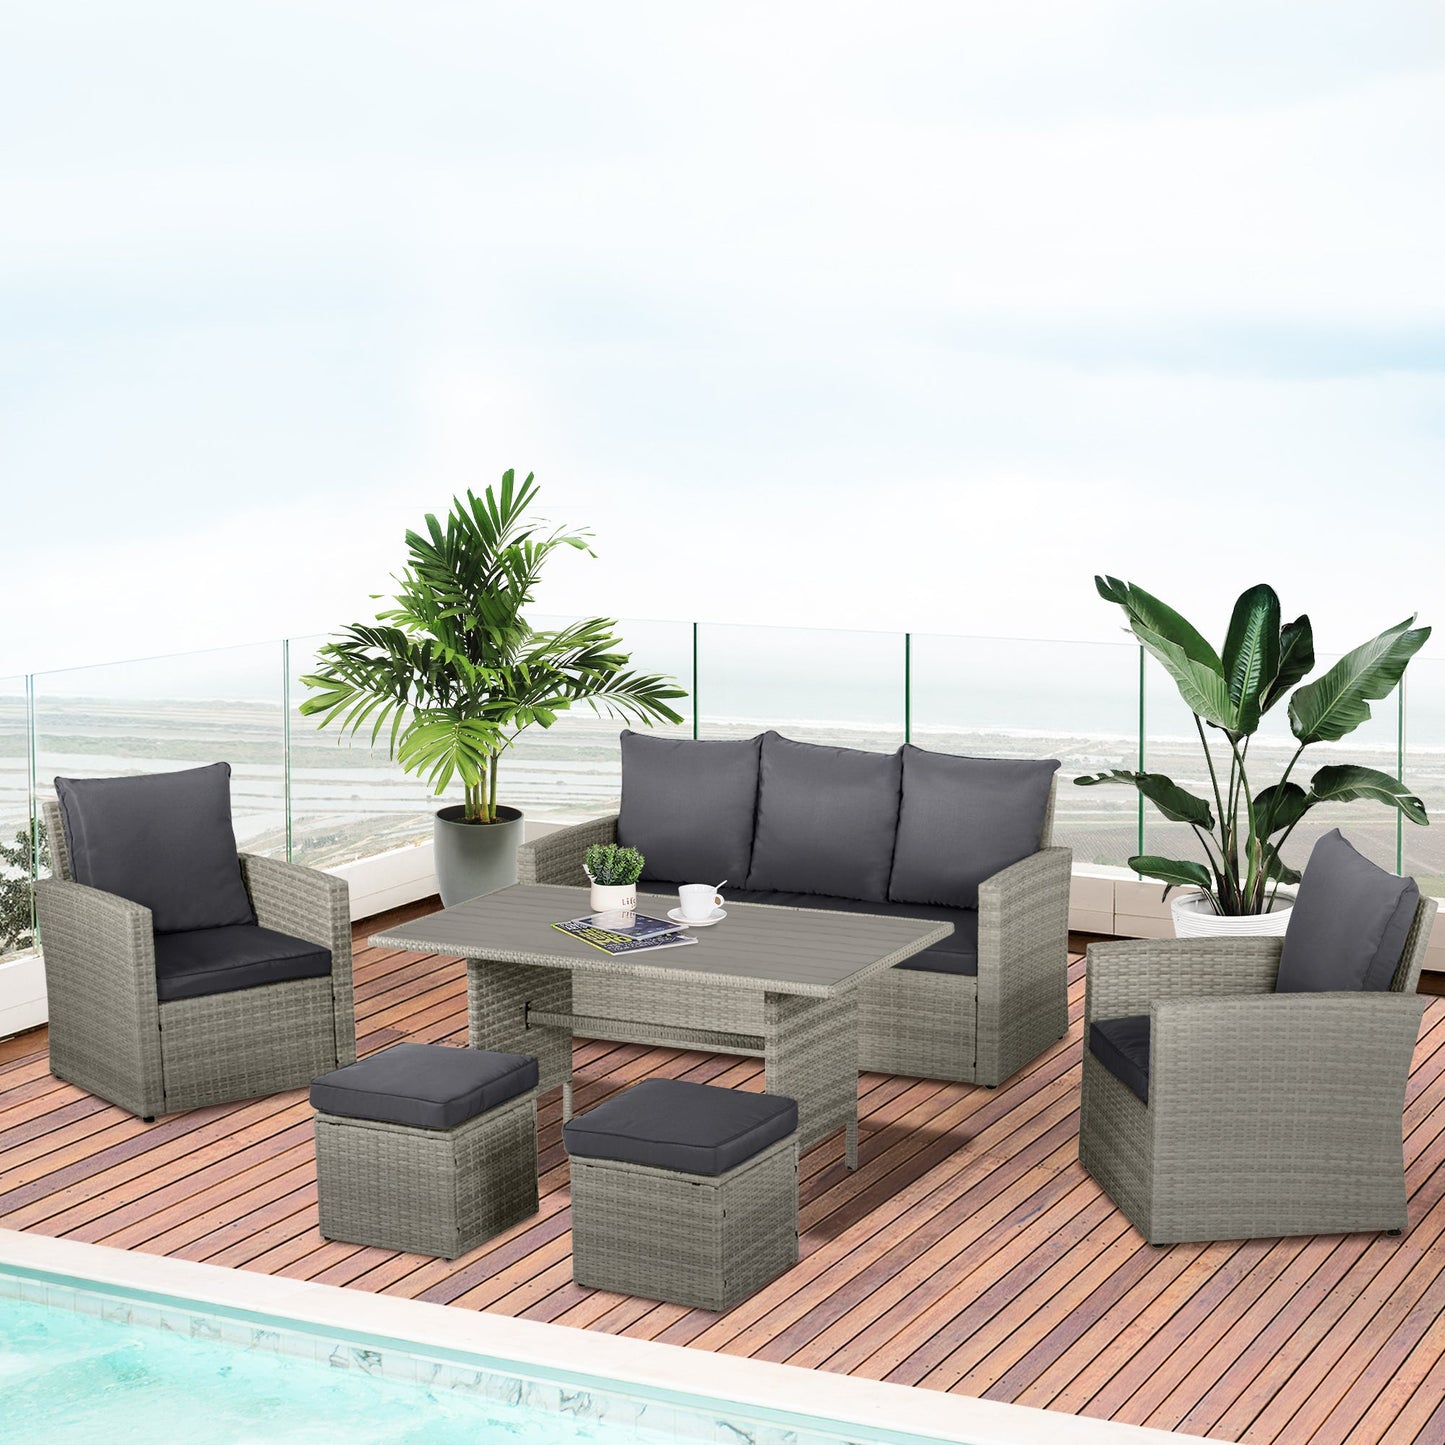 Outdoor and Garden-6 PCS Patio Dining Set All Weather Rattan Wicker Furniture Set with Wood Grain Top Table and Soft Cushions, Mixed Grey - Outdoor Style Company